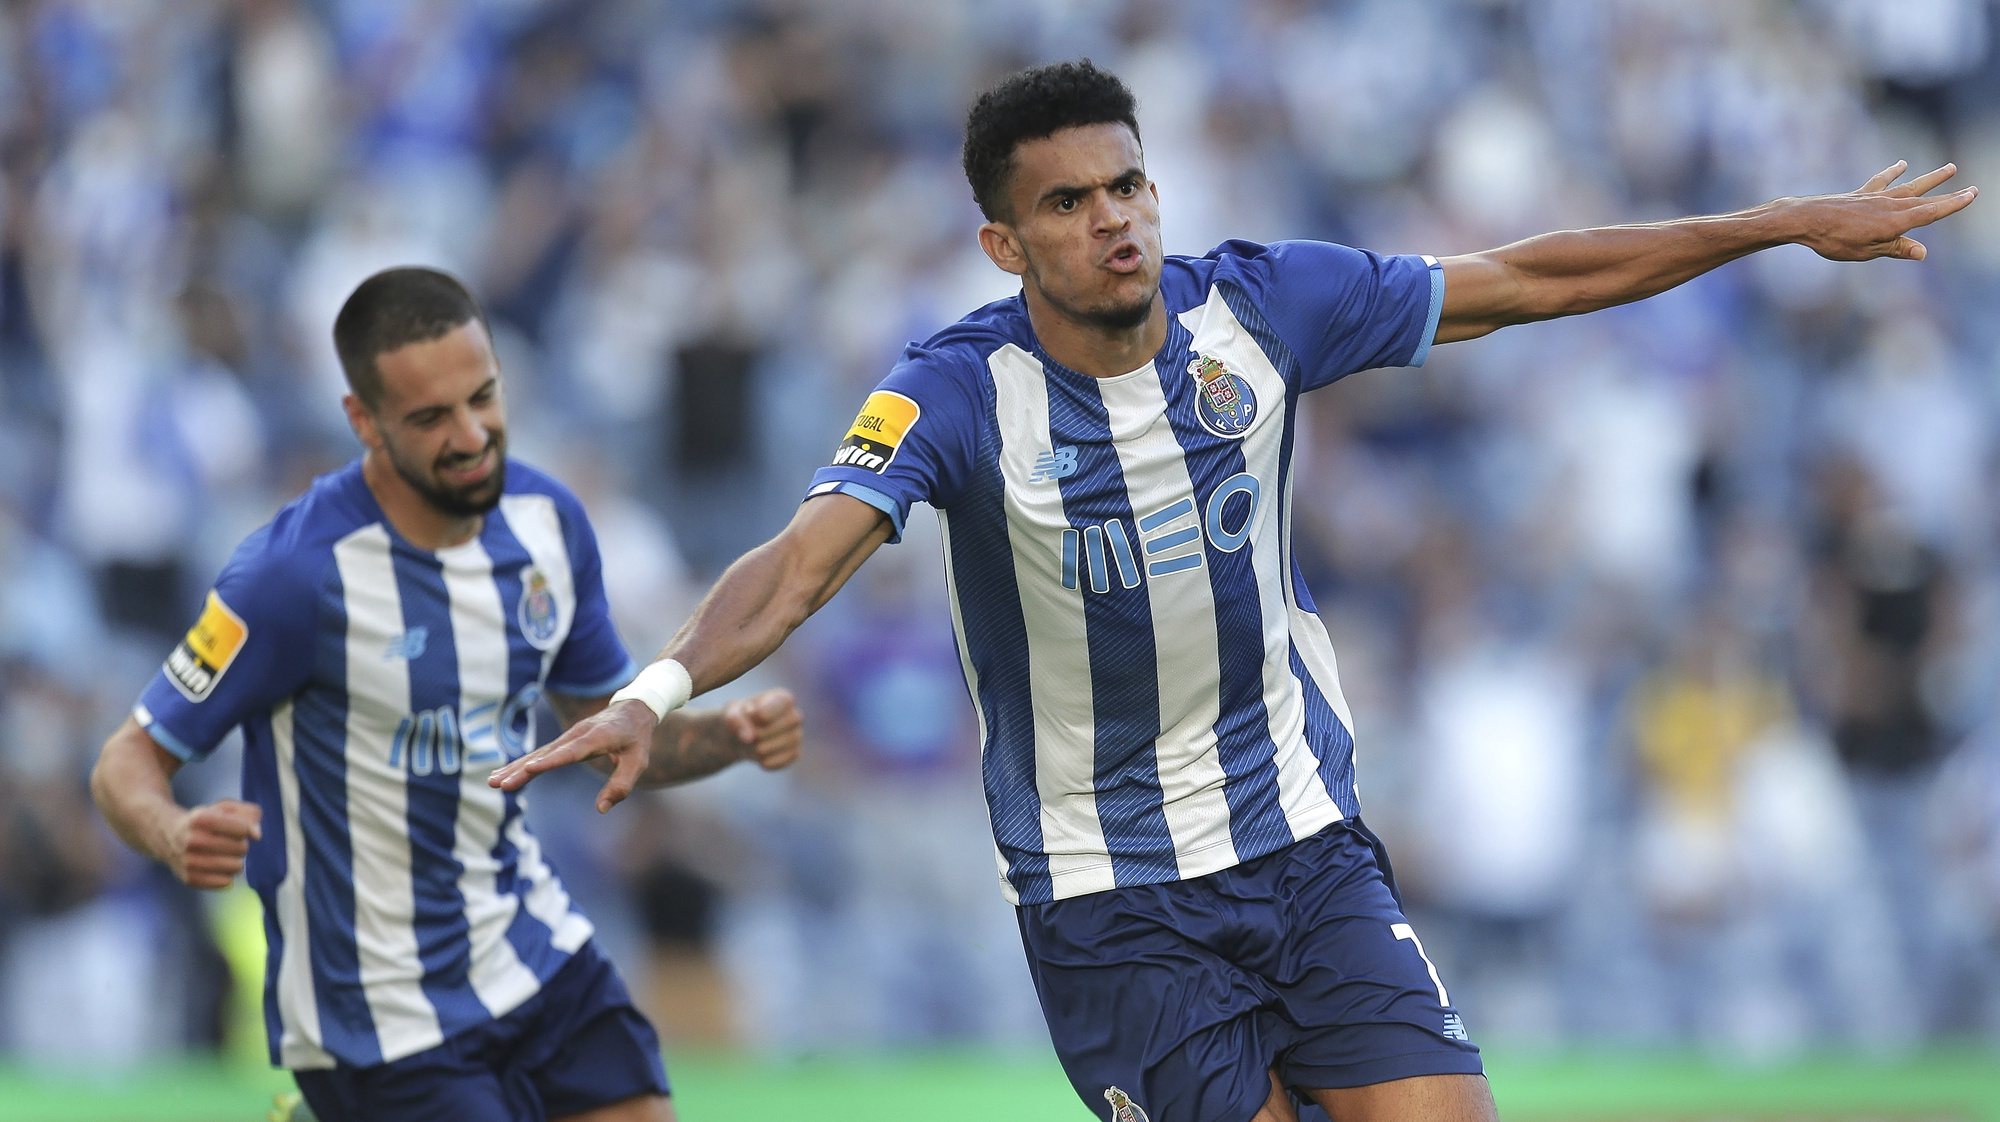 FC Porto player Luis Diaz (R) celebrates after scoring his goal against Belenenses SAD, during their Portuguese First First League soccer match, held at Dragão stadium in Porto, Portugal, 8th August 2021. MANUEL FERNANDO ARAUJO/LUSA